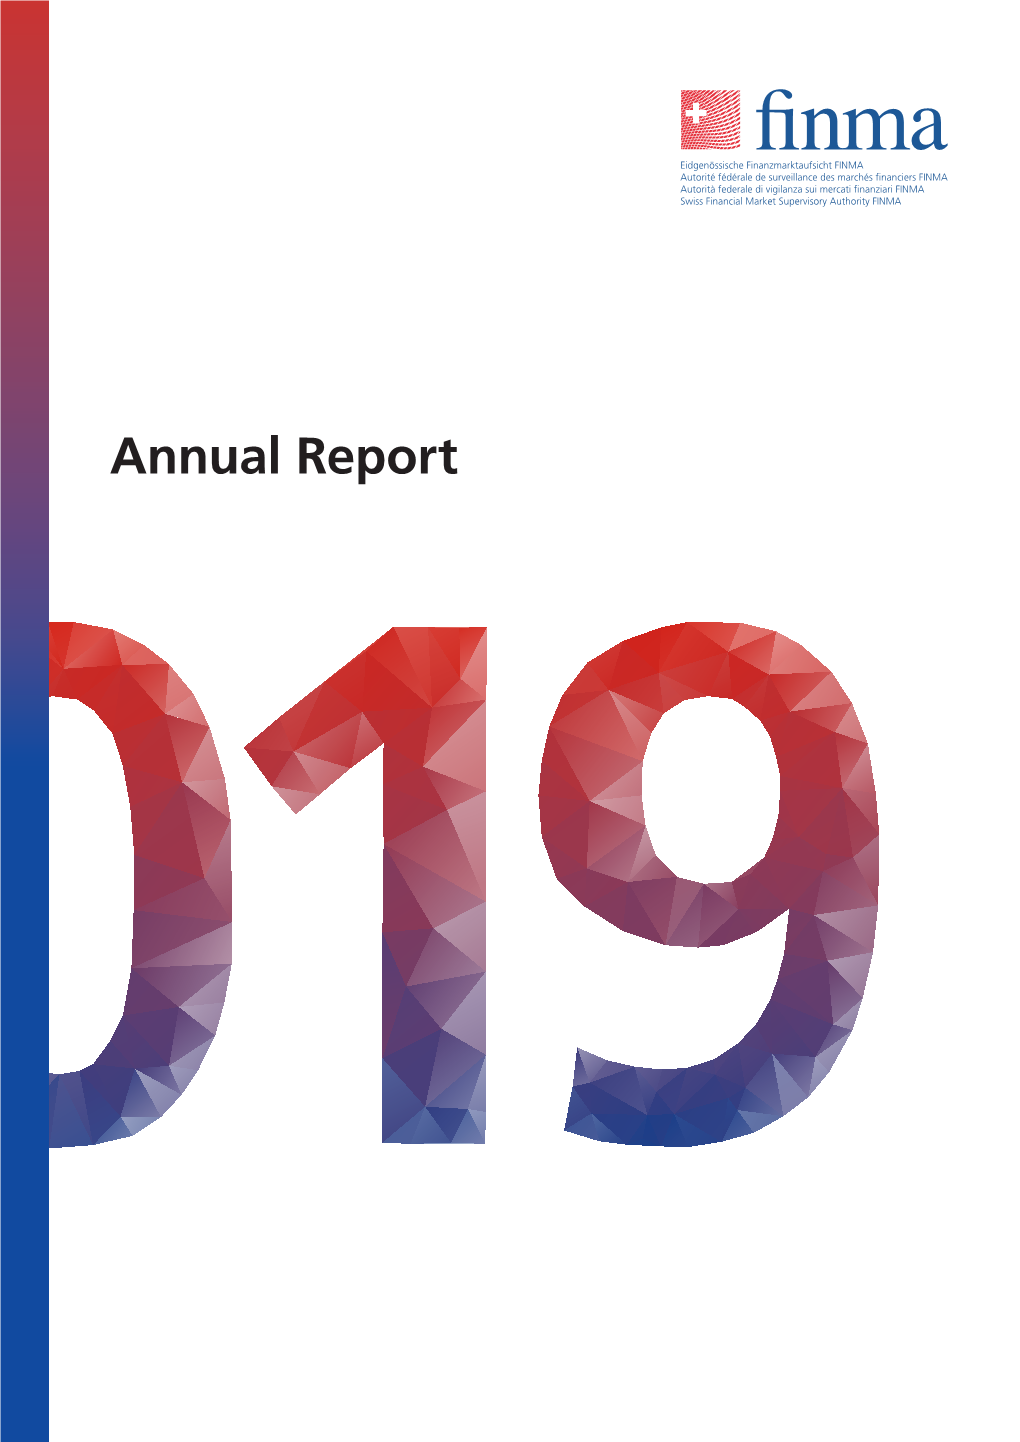 Annual Report 2019 Submit Effective Emergency Plans Expires (31 December)